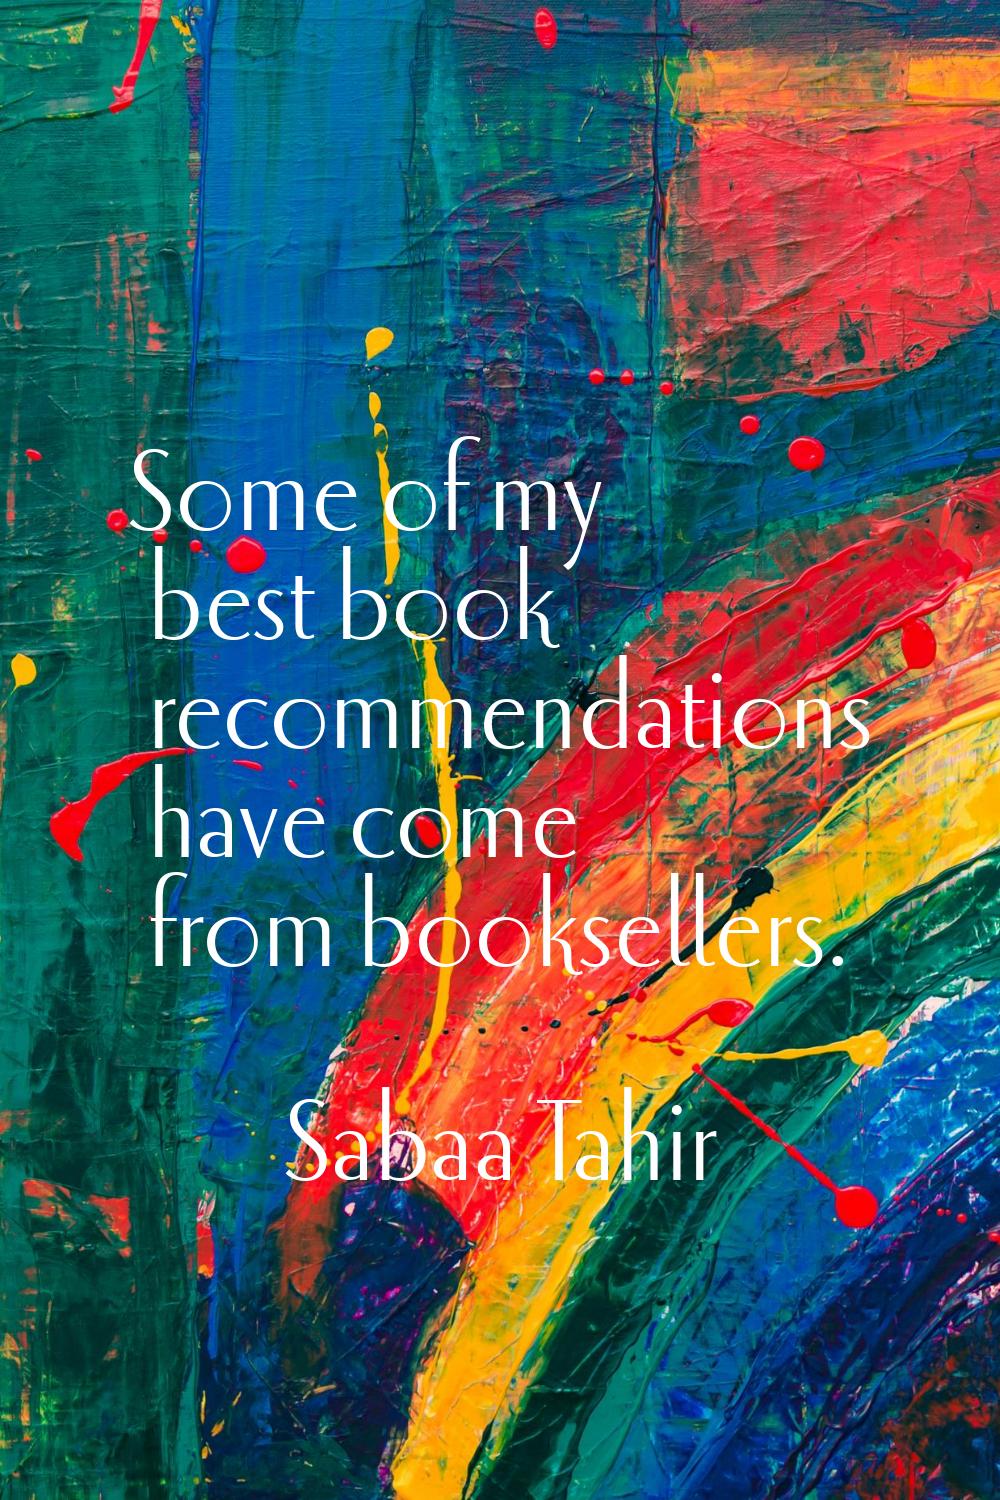 Some of my best book recommendations have come from booksellers.